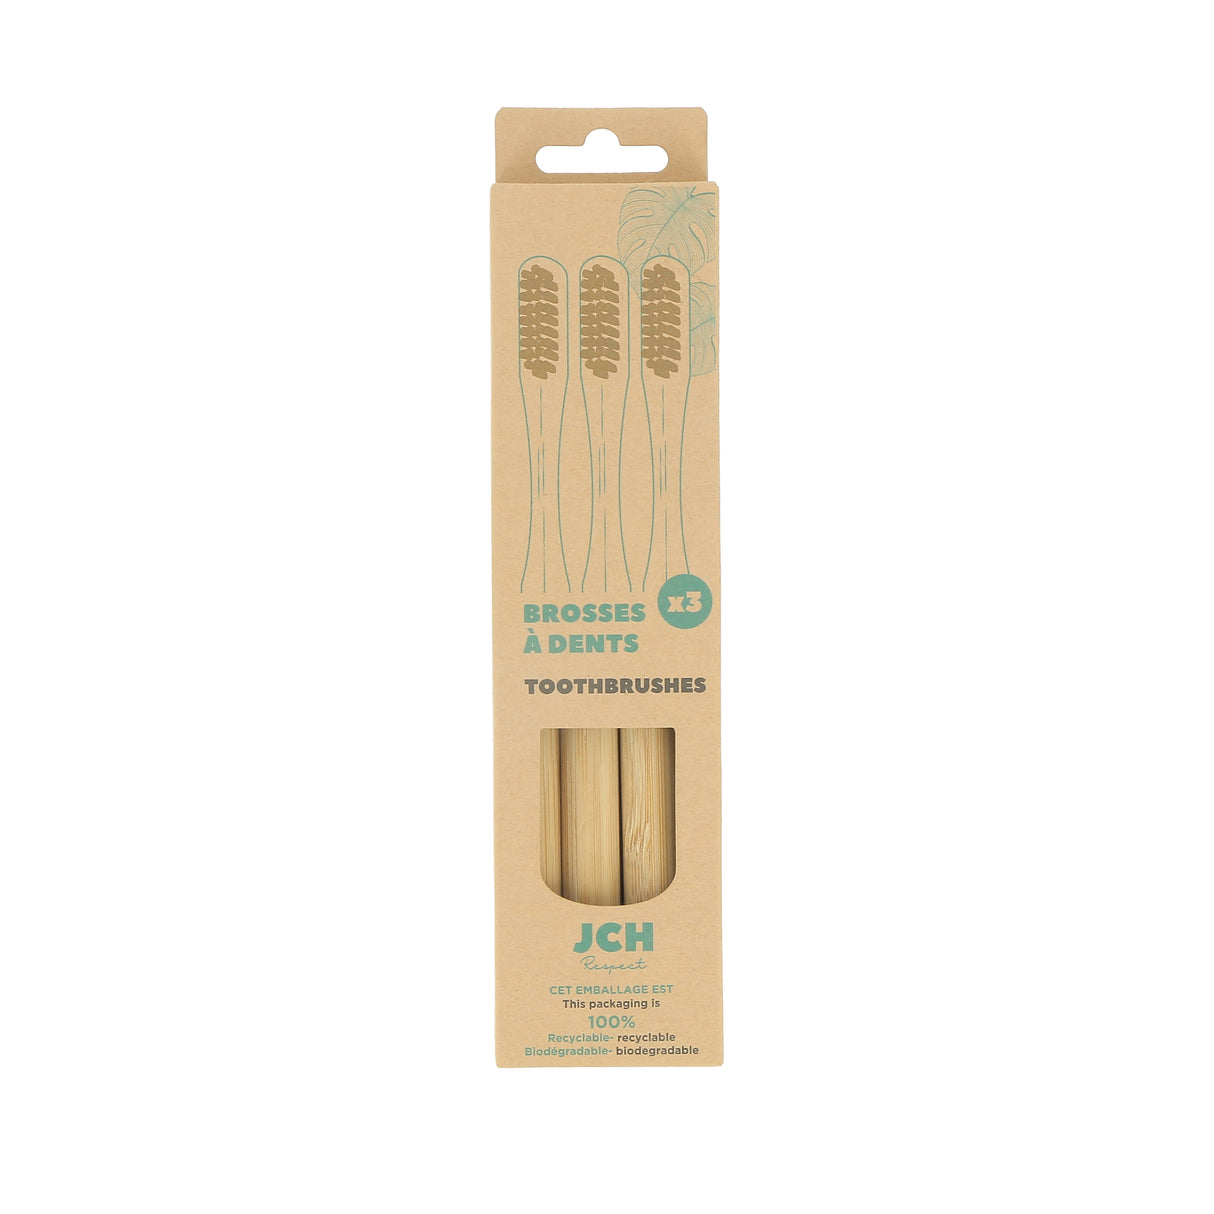 Set of 3 Toothbrushes with polyamide and bamboo bristles